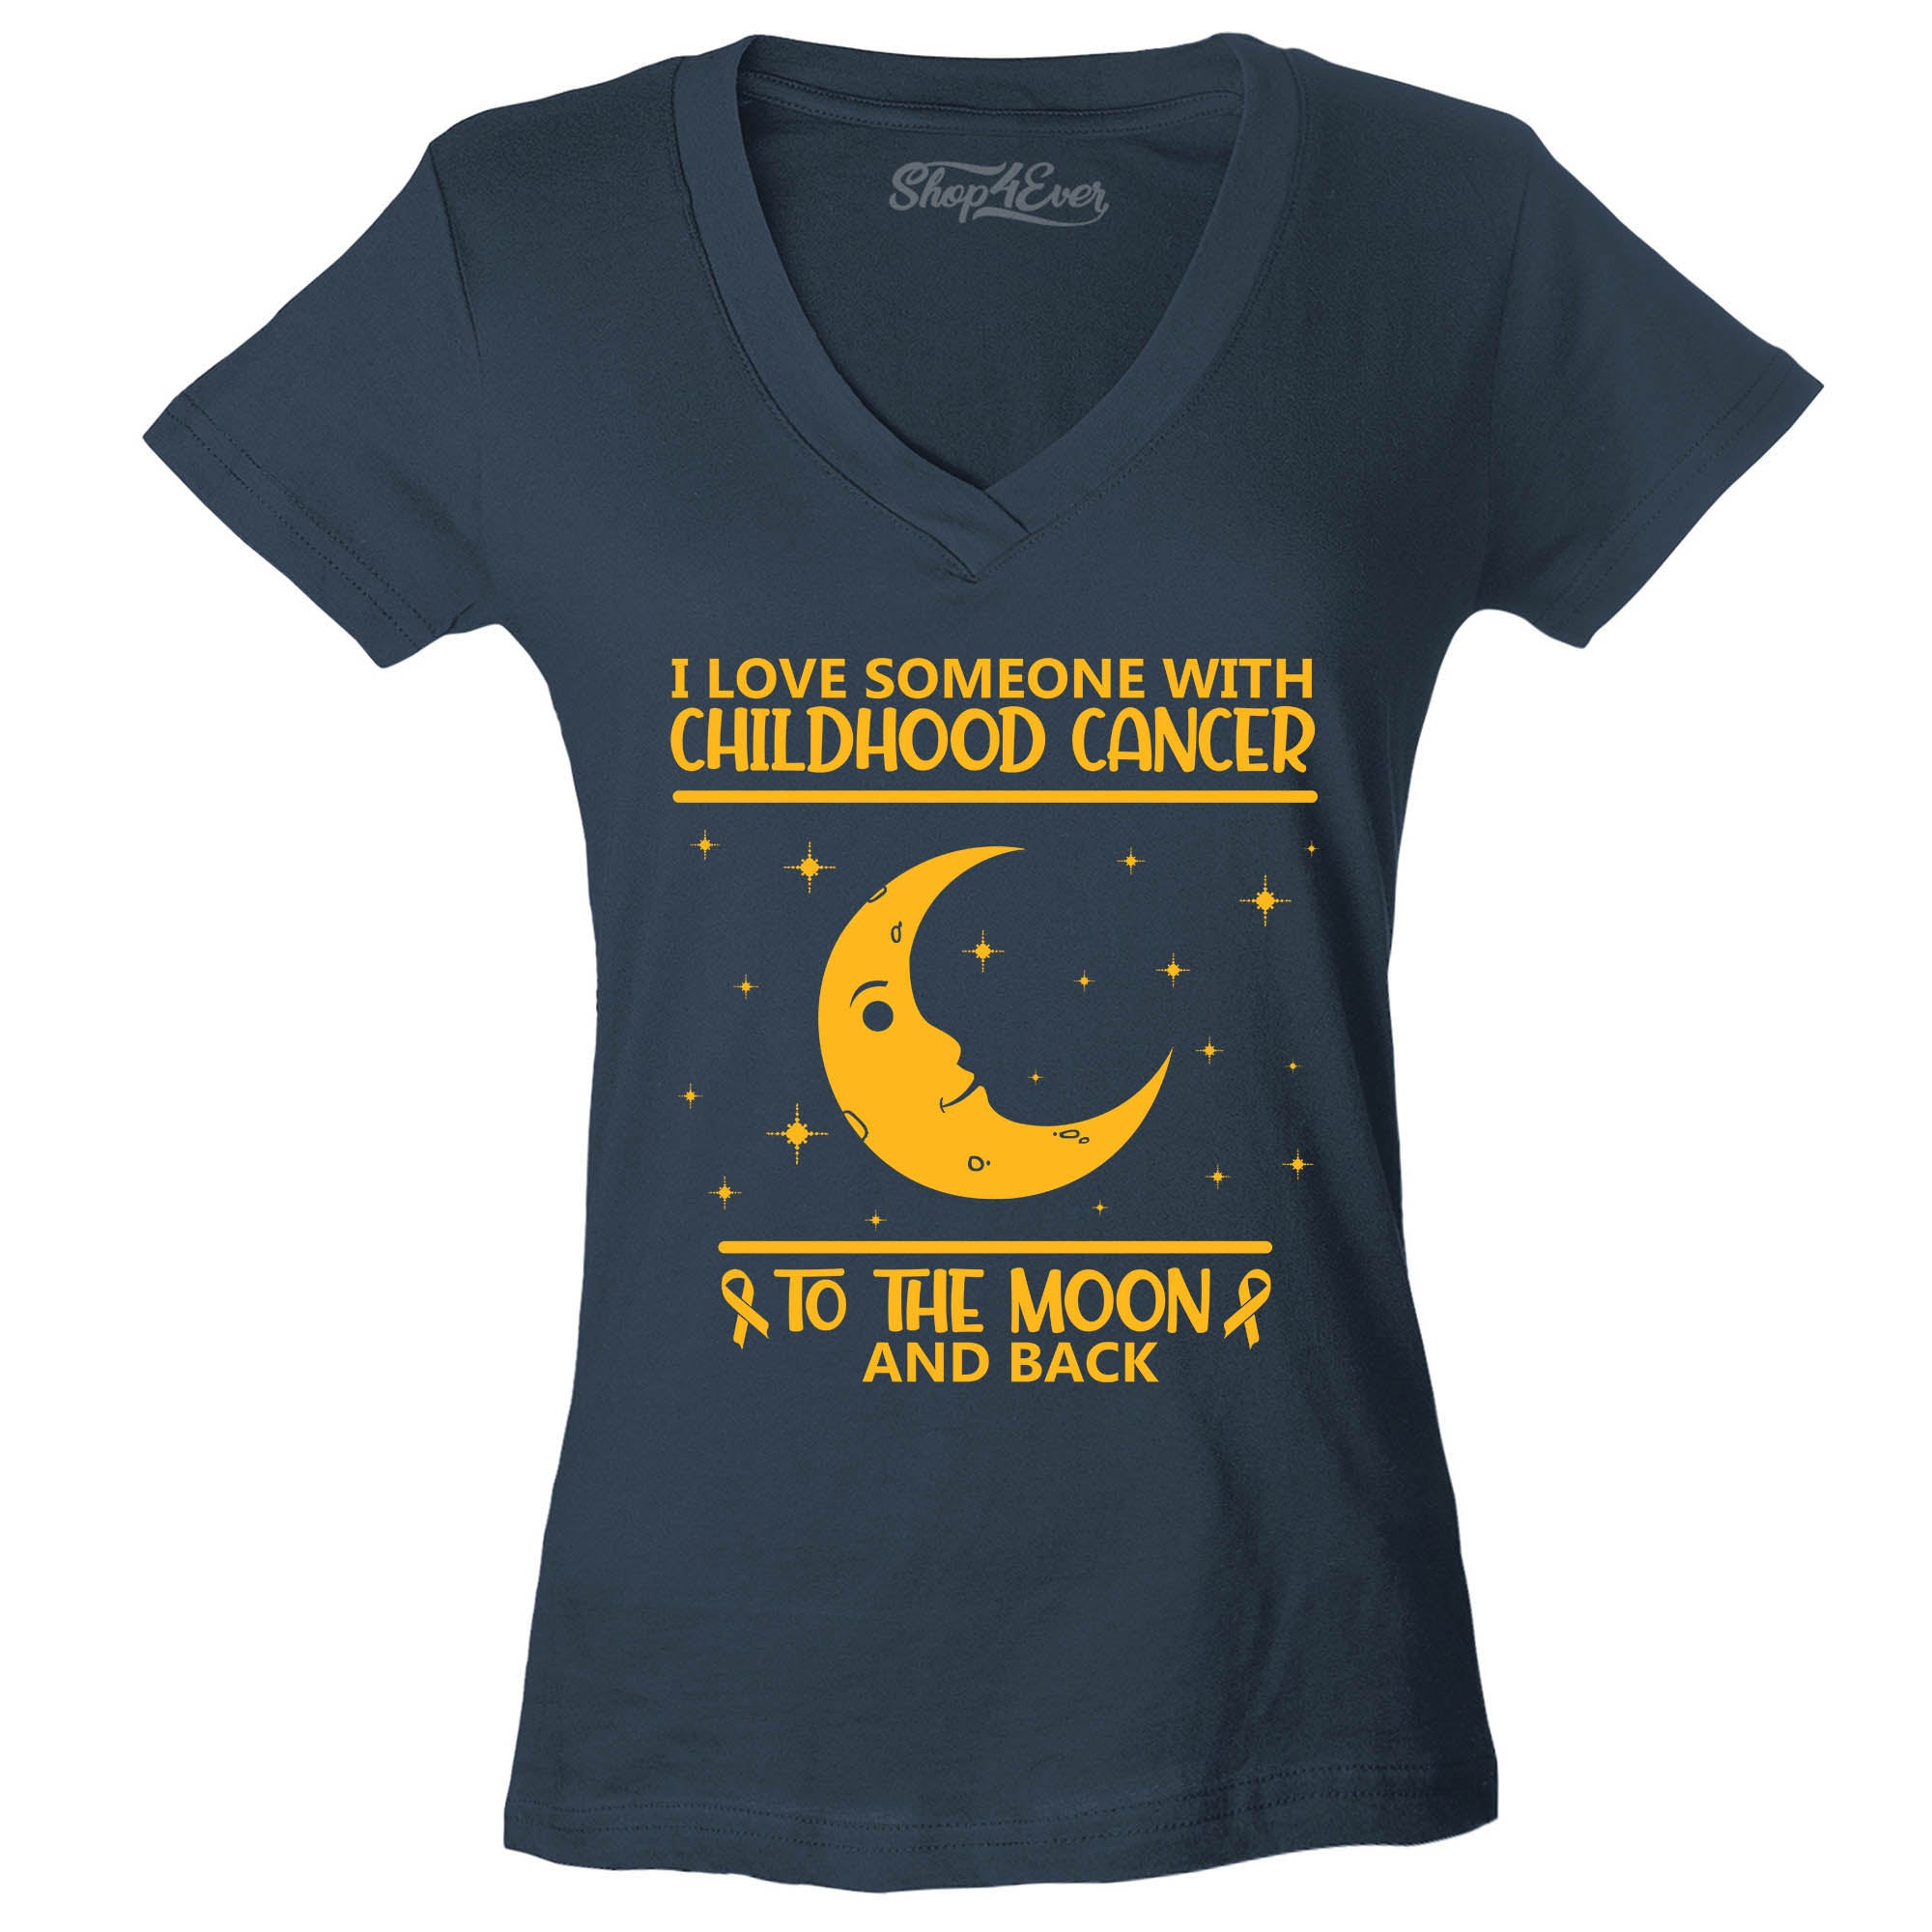 I Love Someone with Childhood Cancer to The Moon and Back Women's V-Neck T-Shirt Slim Fit